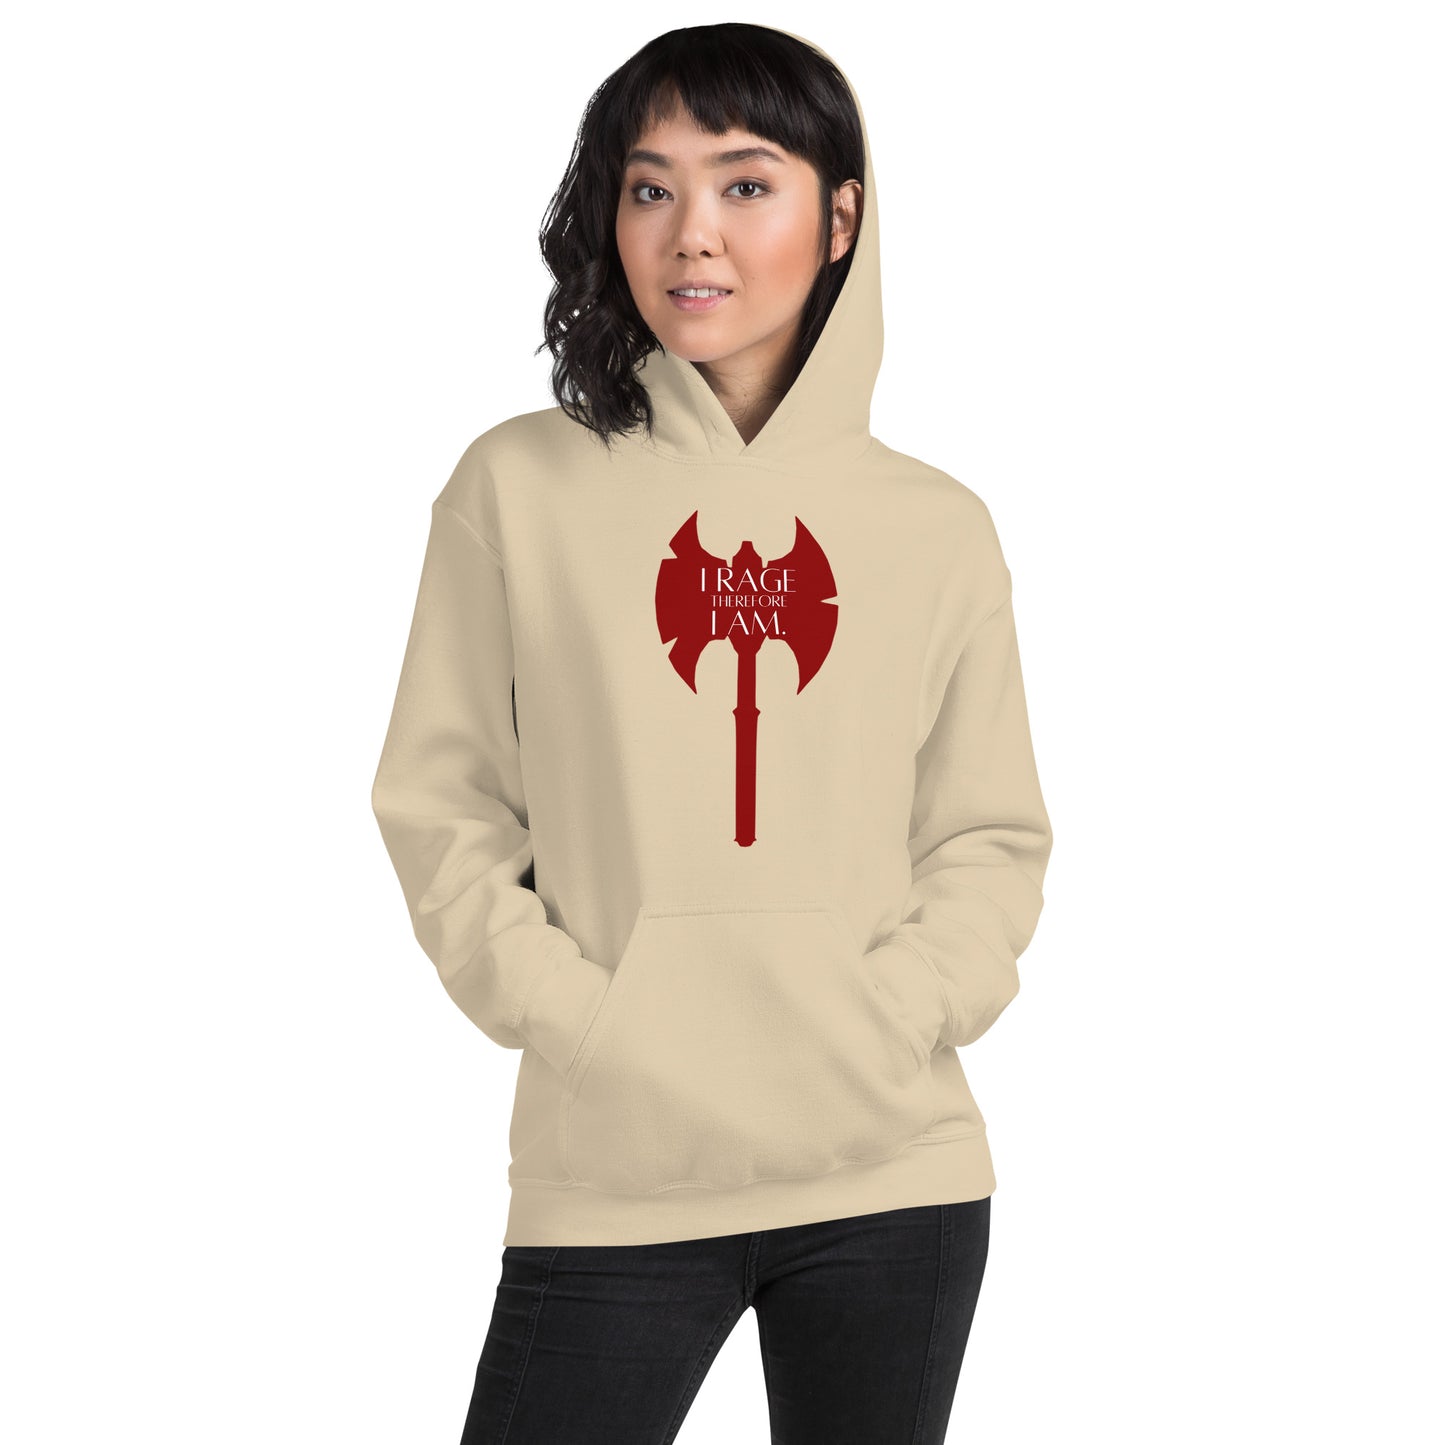 I Rage therefore I am - Barbarian Unisex Hoodie